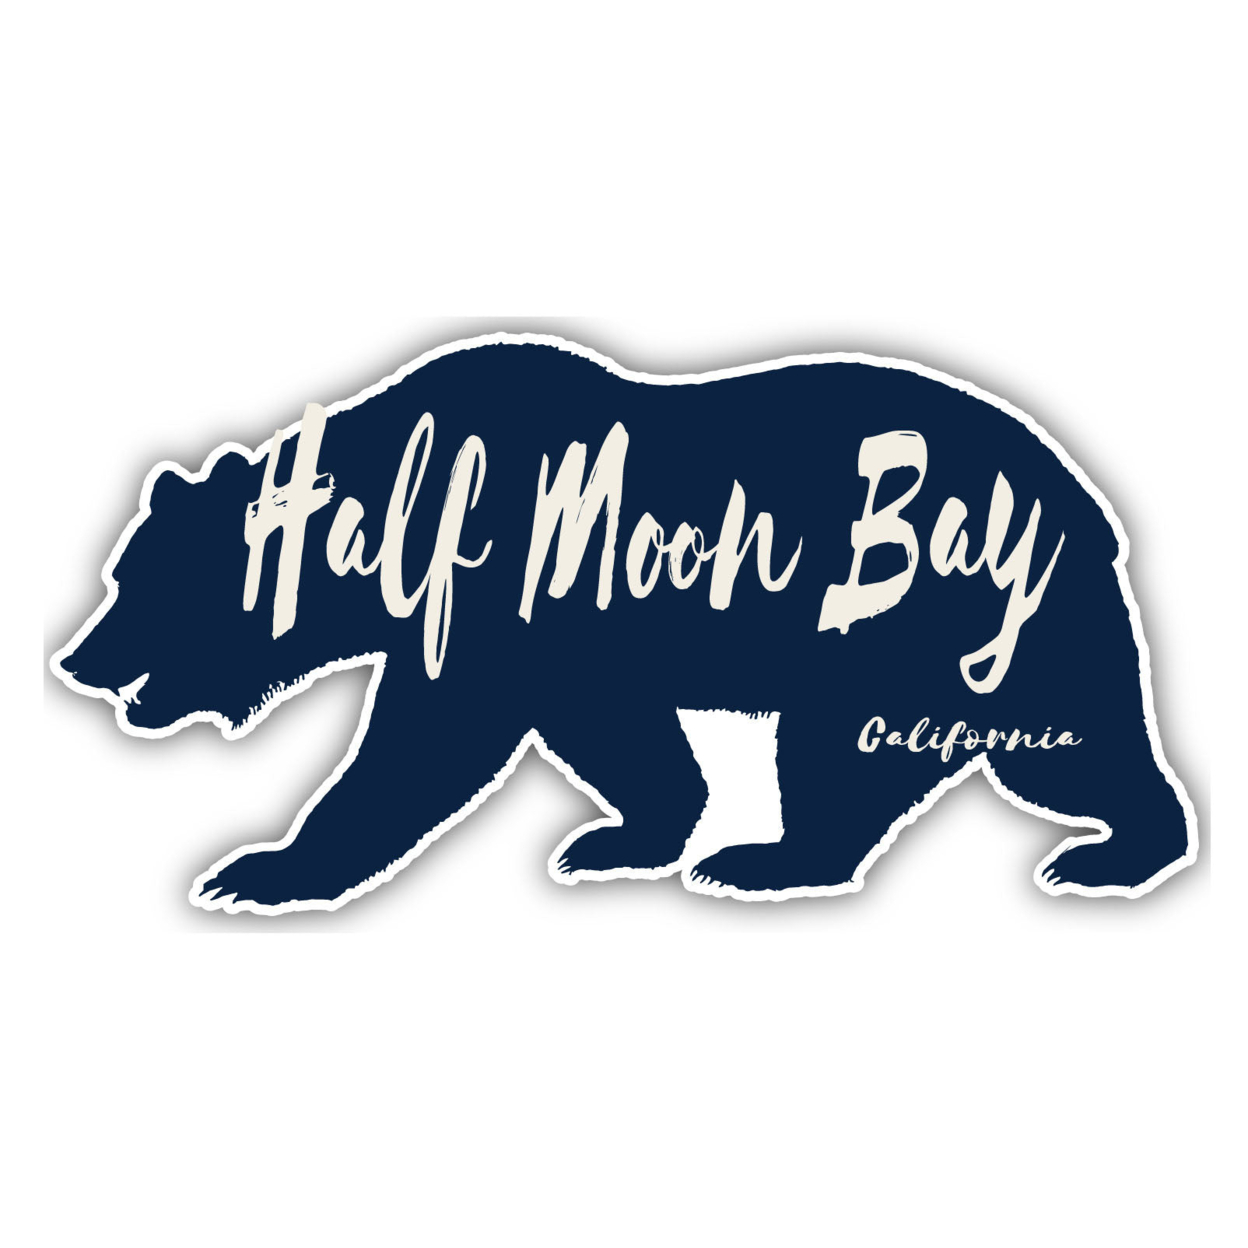 Half Moon Bay California Souvenir Decorative Stickers (Choose Theme And Size) - 4-Pack, 12-Inch, Bear